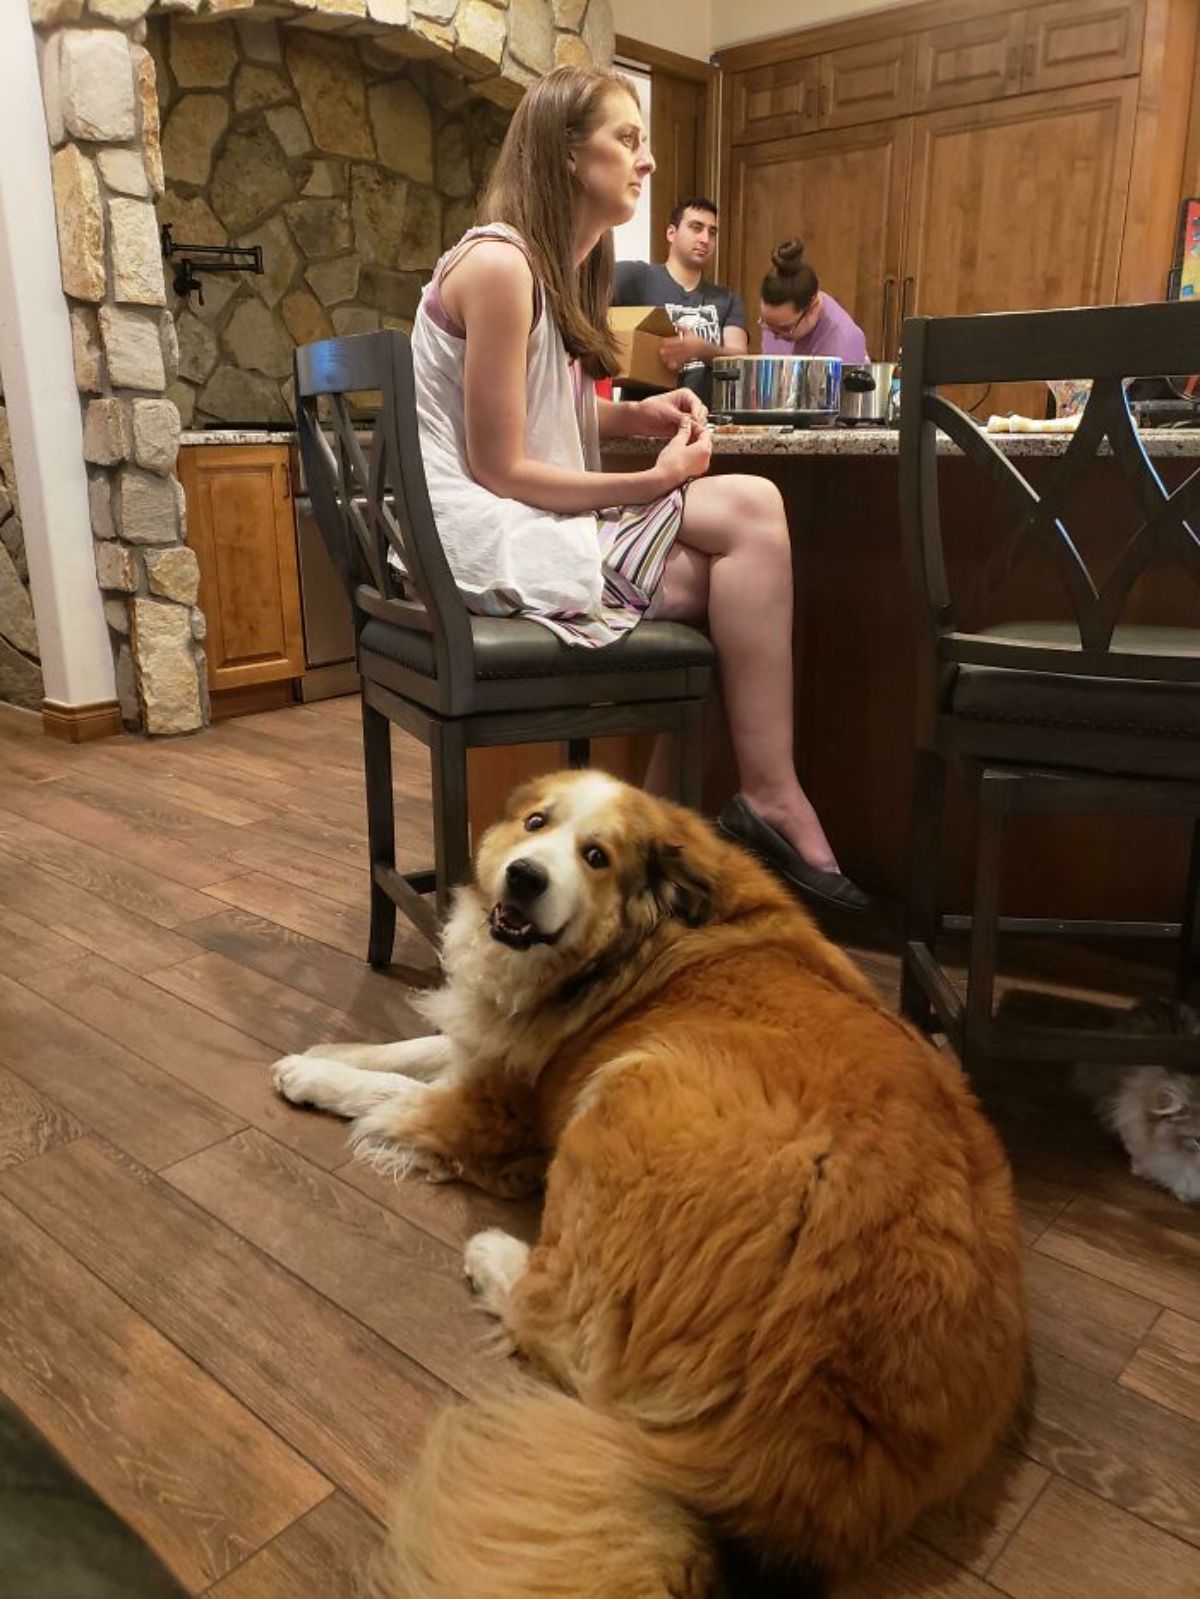 brown and white fluffy dog laying on the floor under a woman sitting on a chair